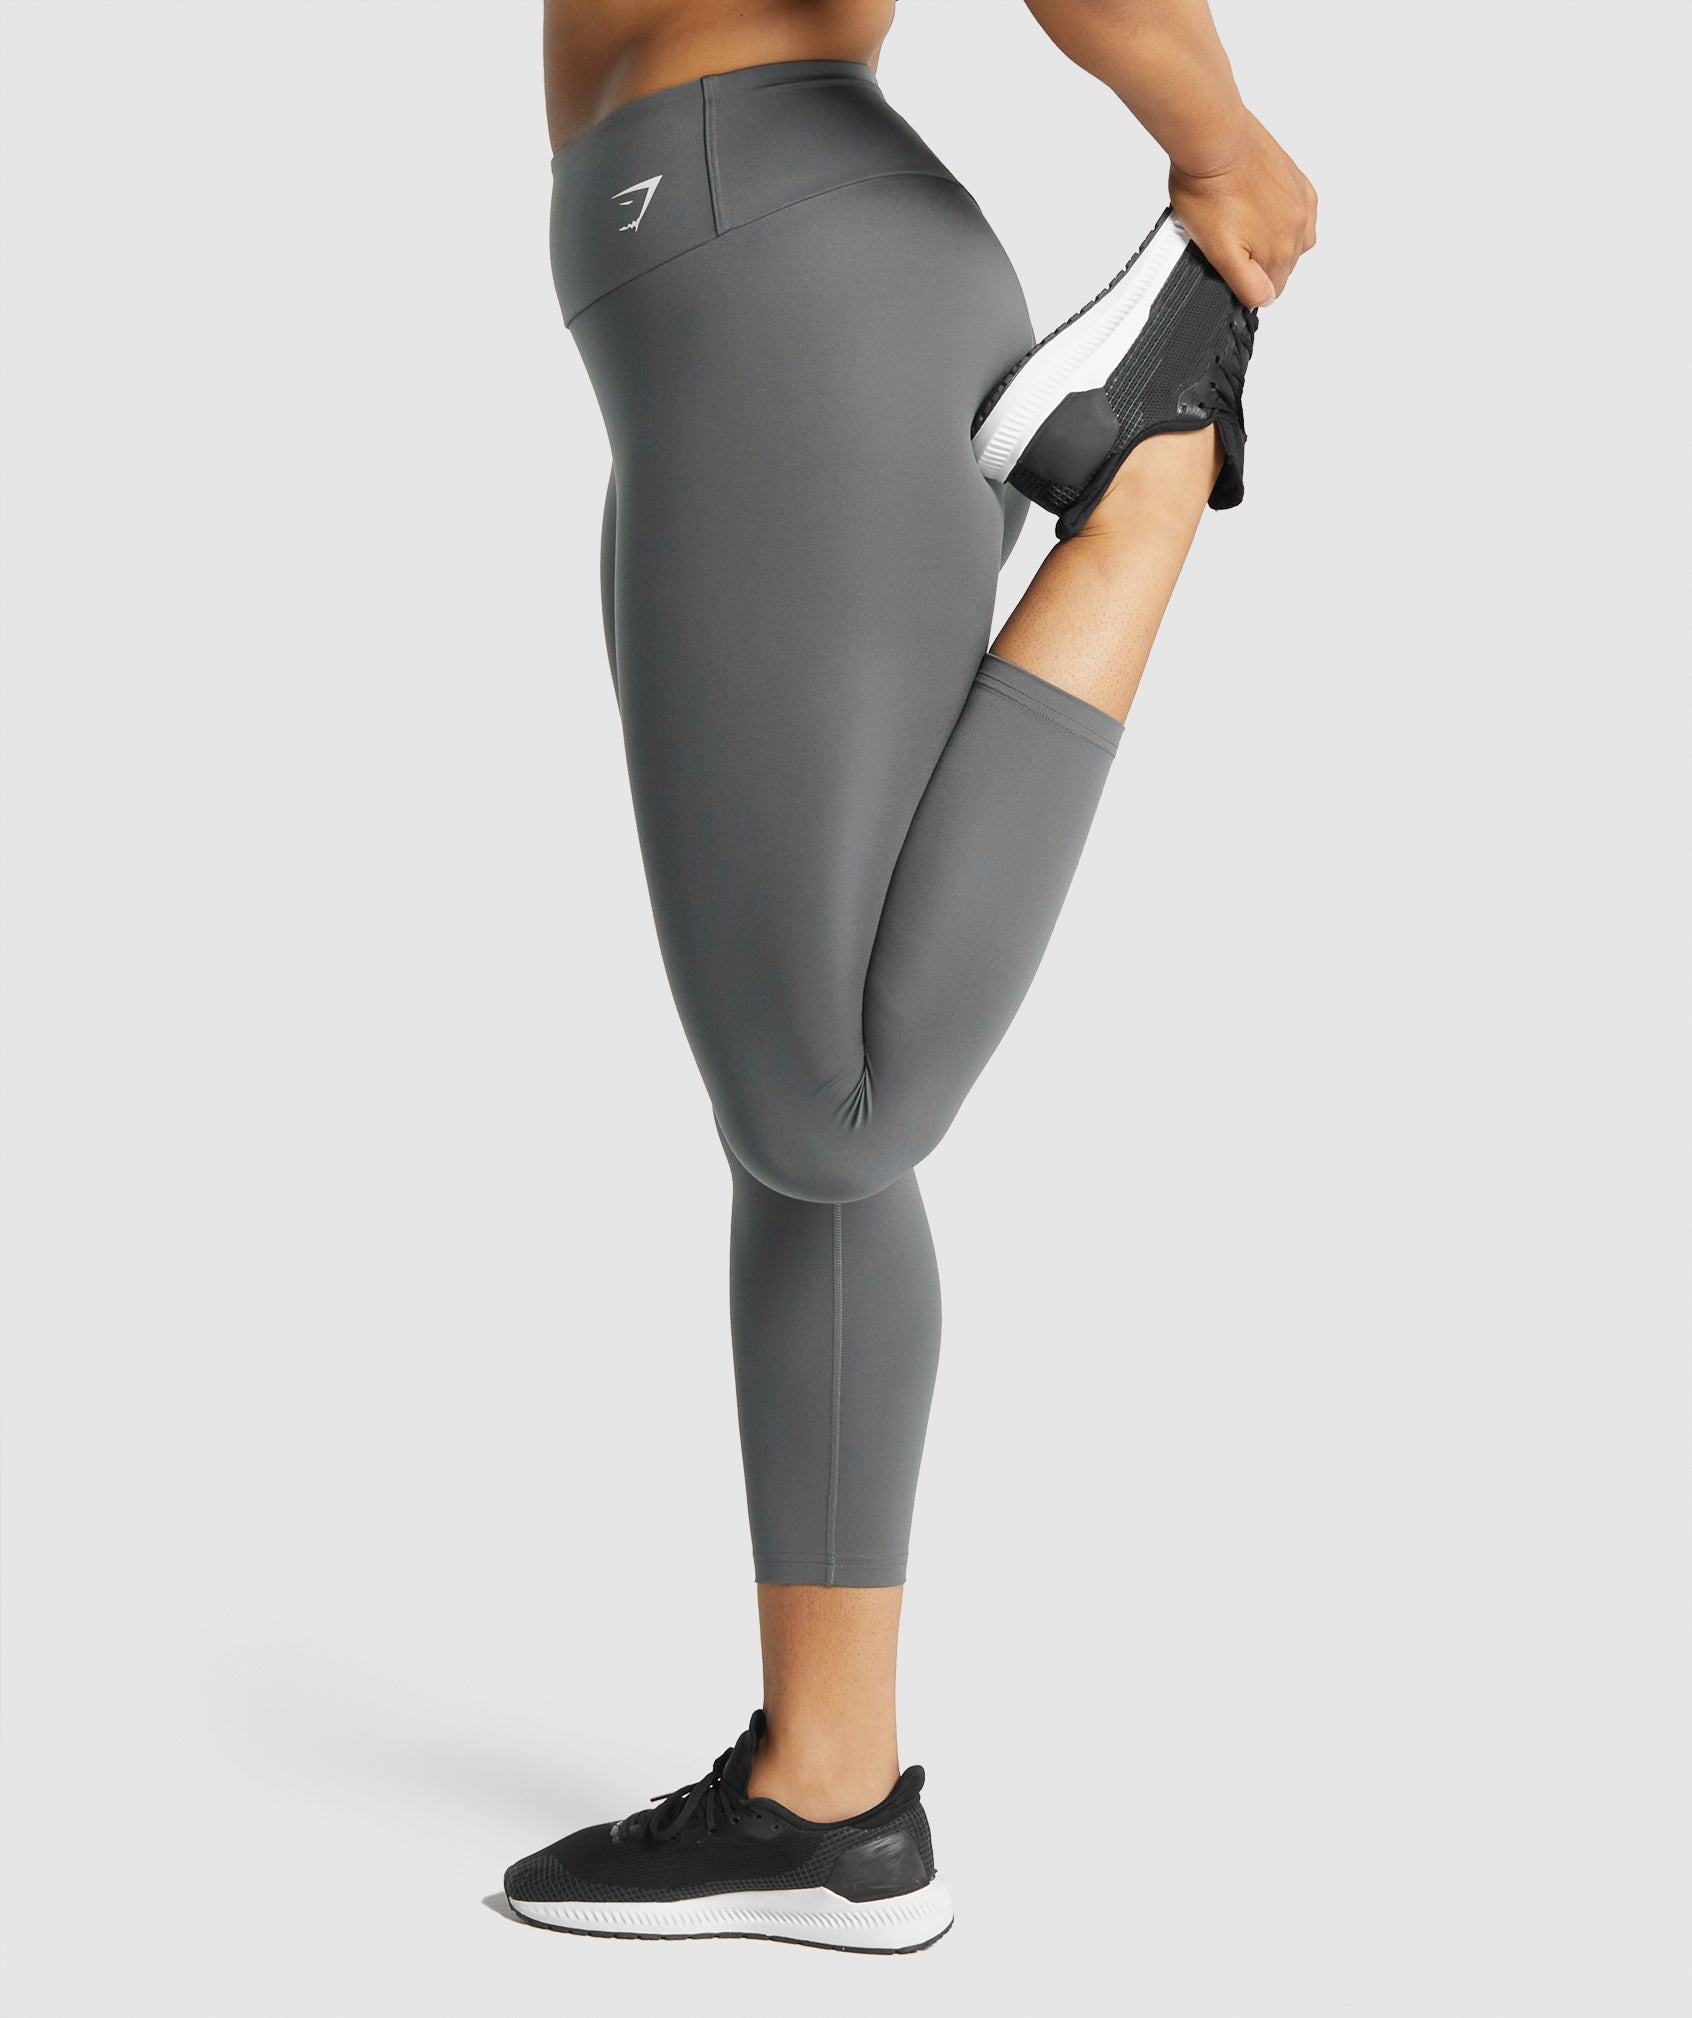 GYMSHARK - NEW Charcoal Grey Speed Leggings - Size Small